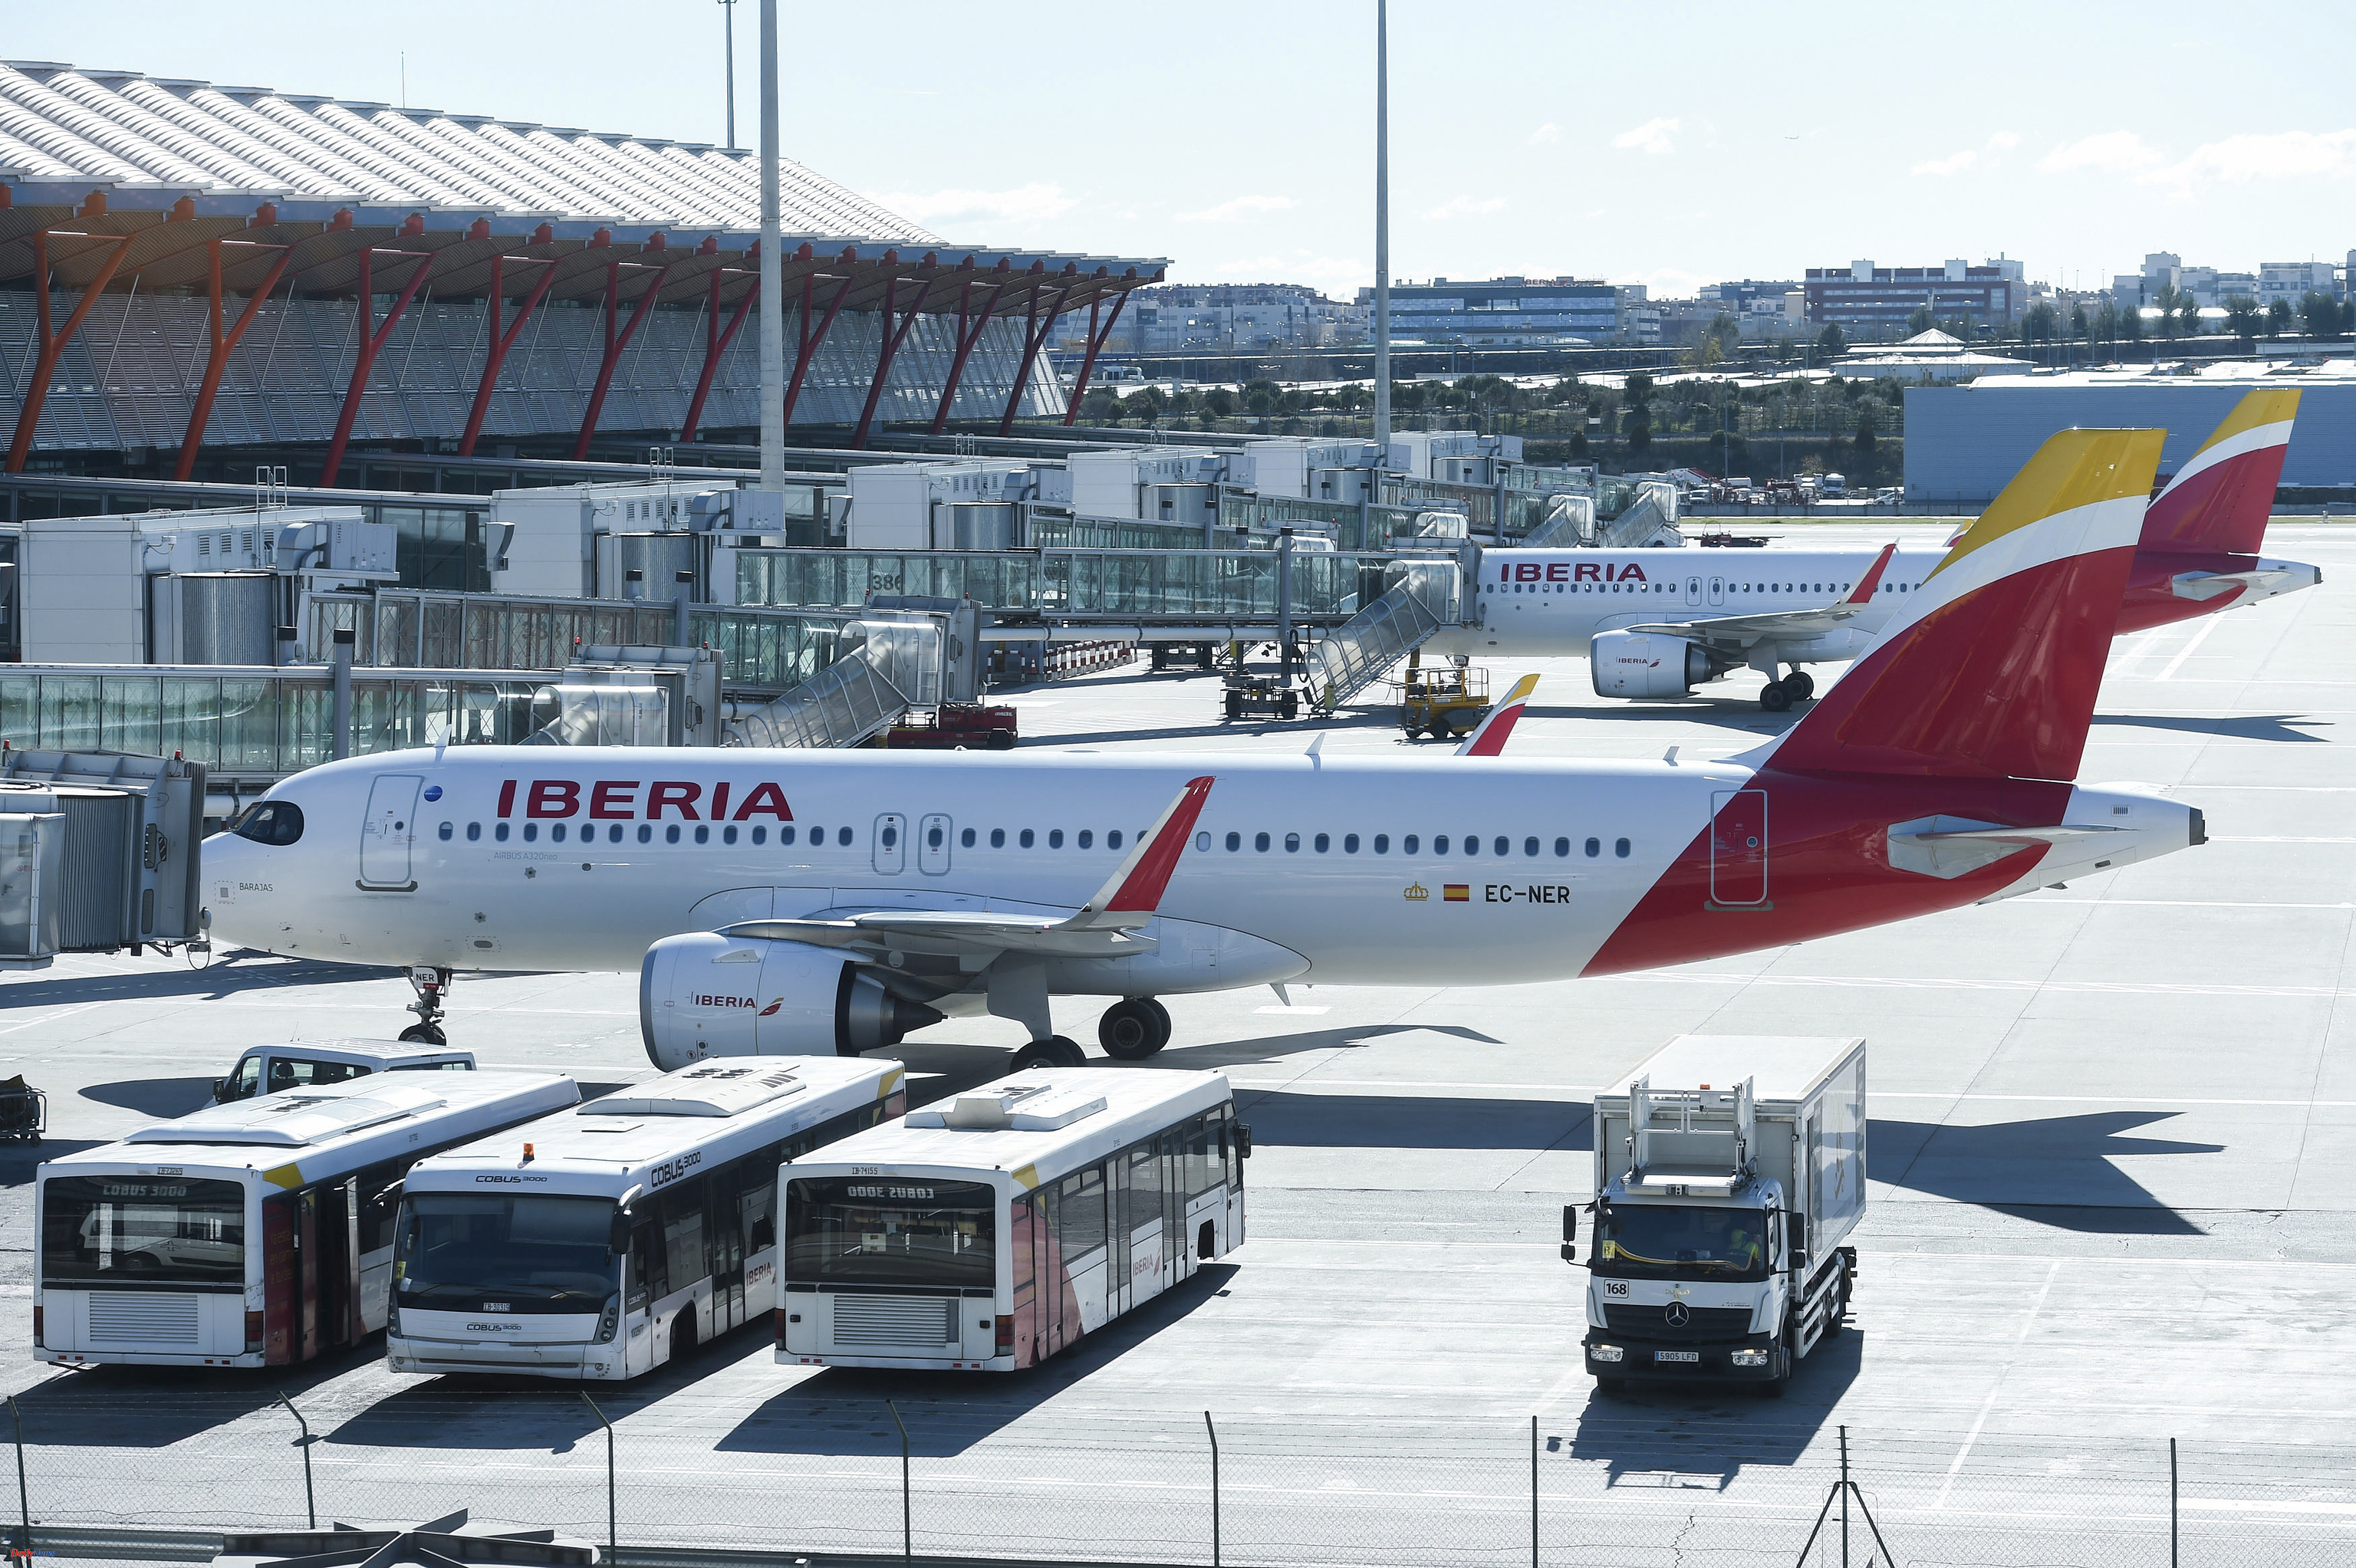 UGT and CCOO flights announce strike in Iberia handling for January 5 to 8